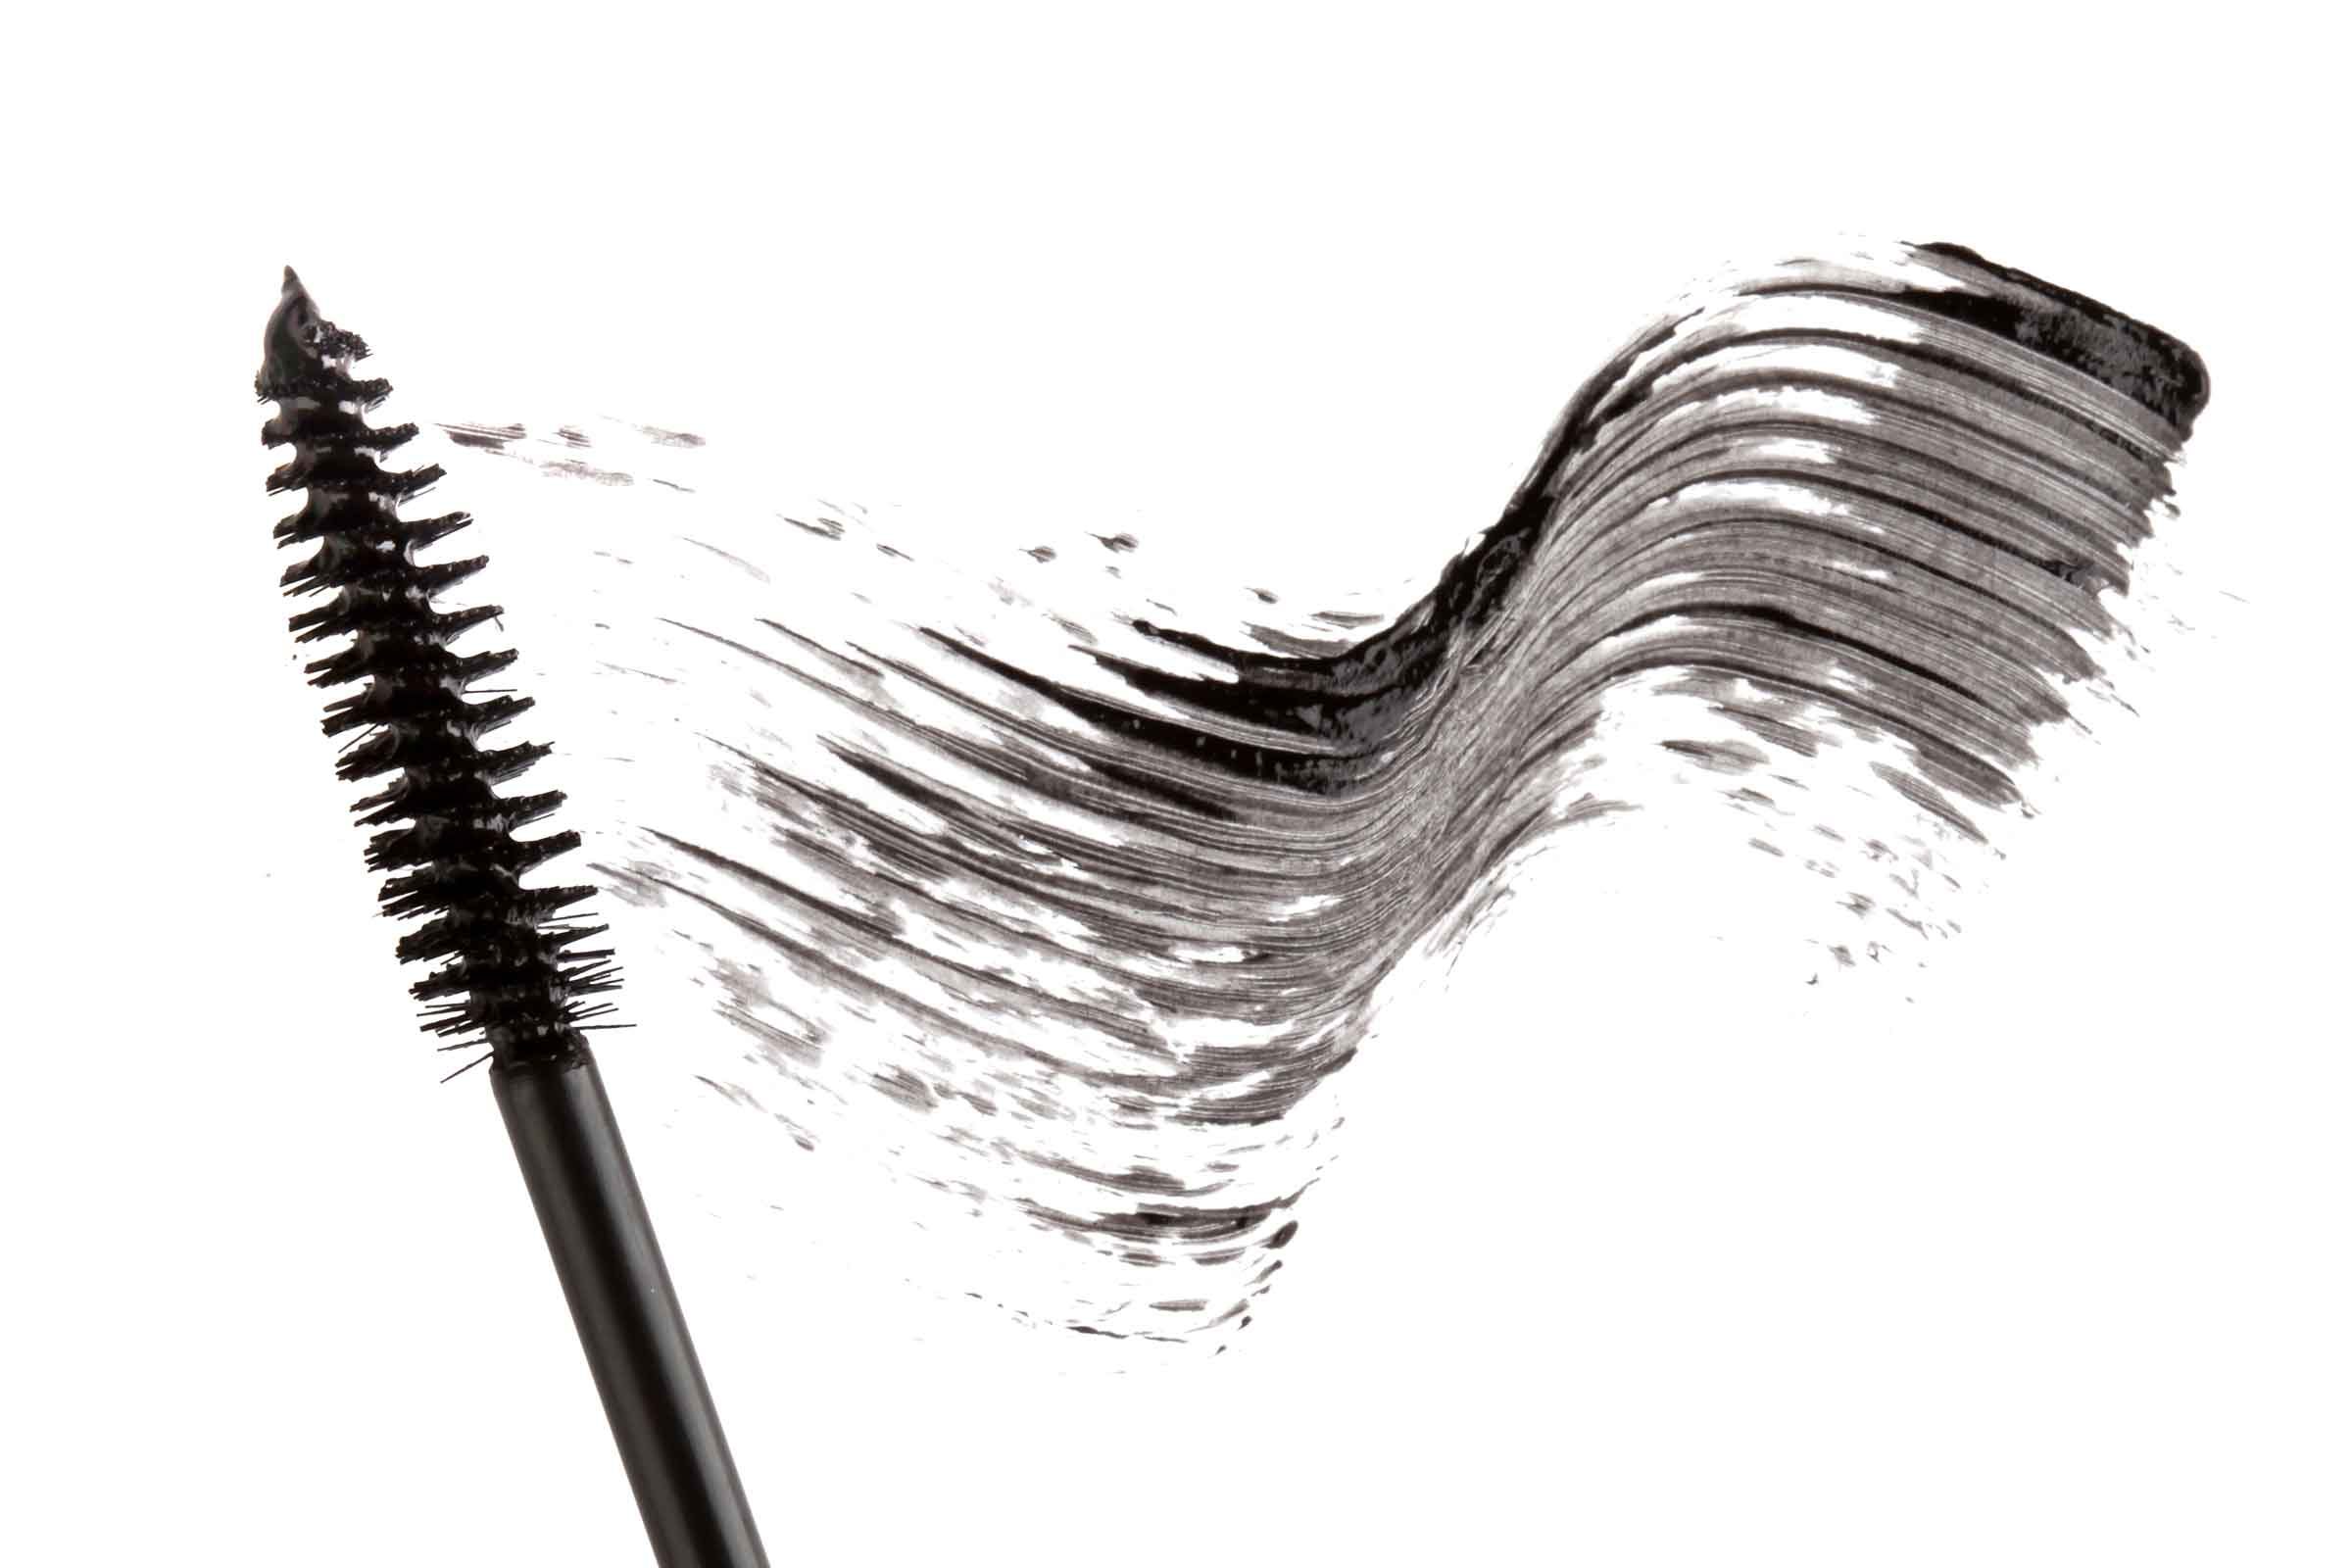 Bad Makeup: Mistakes That Make You Look Sloppy | Reader's Digest